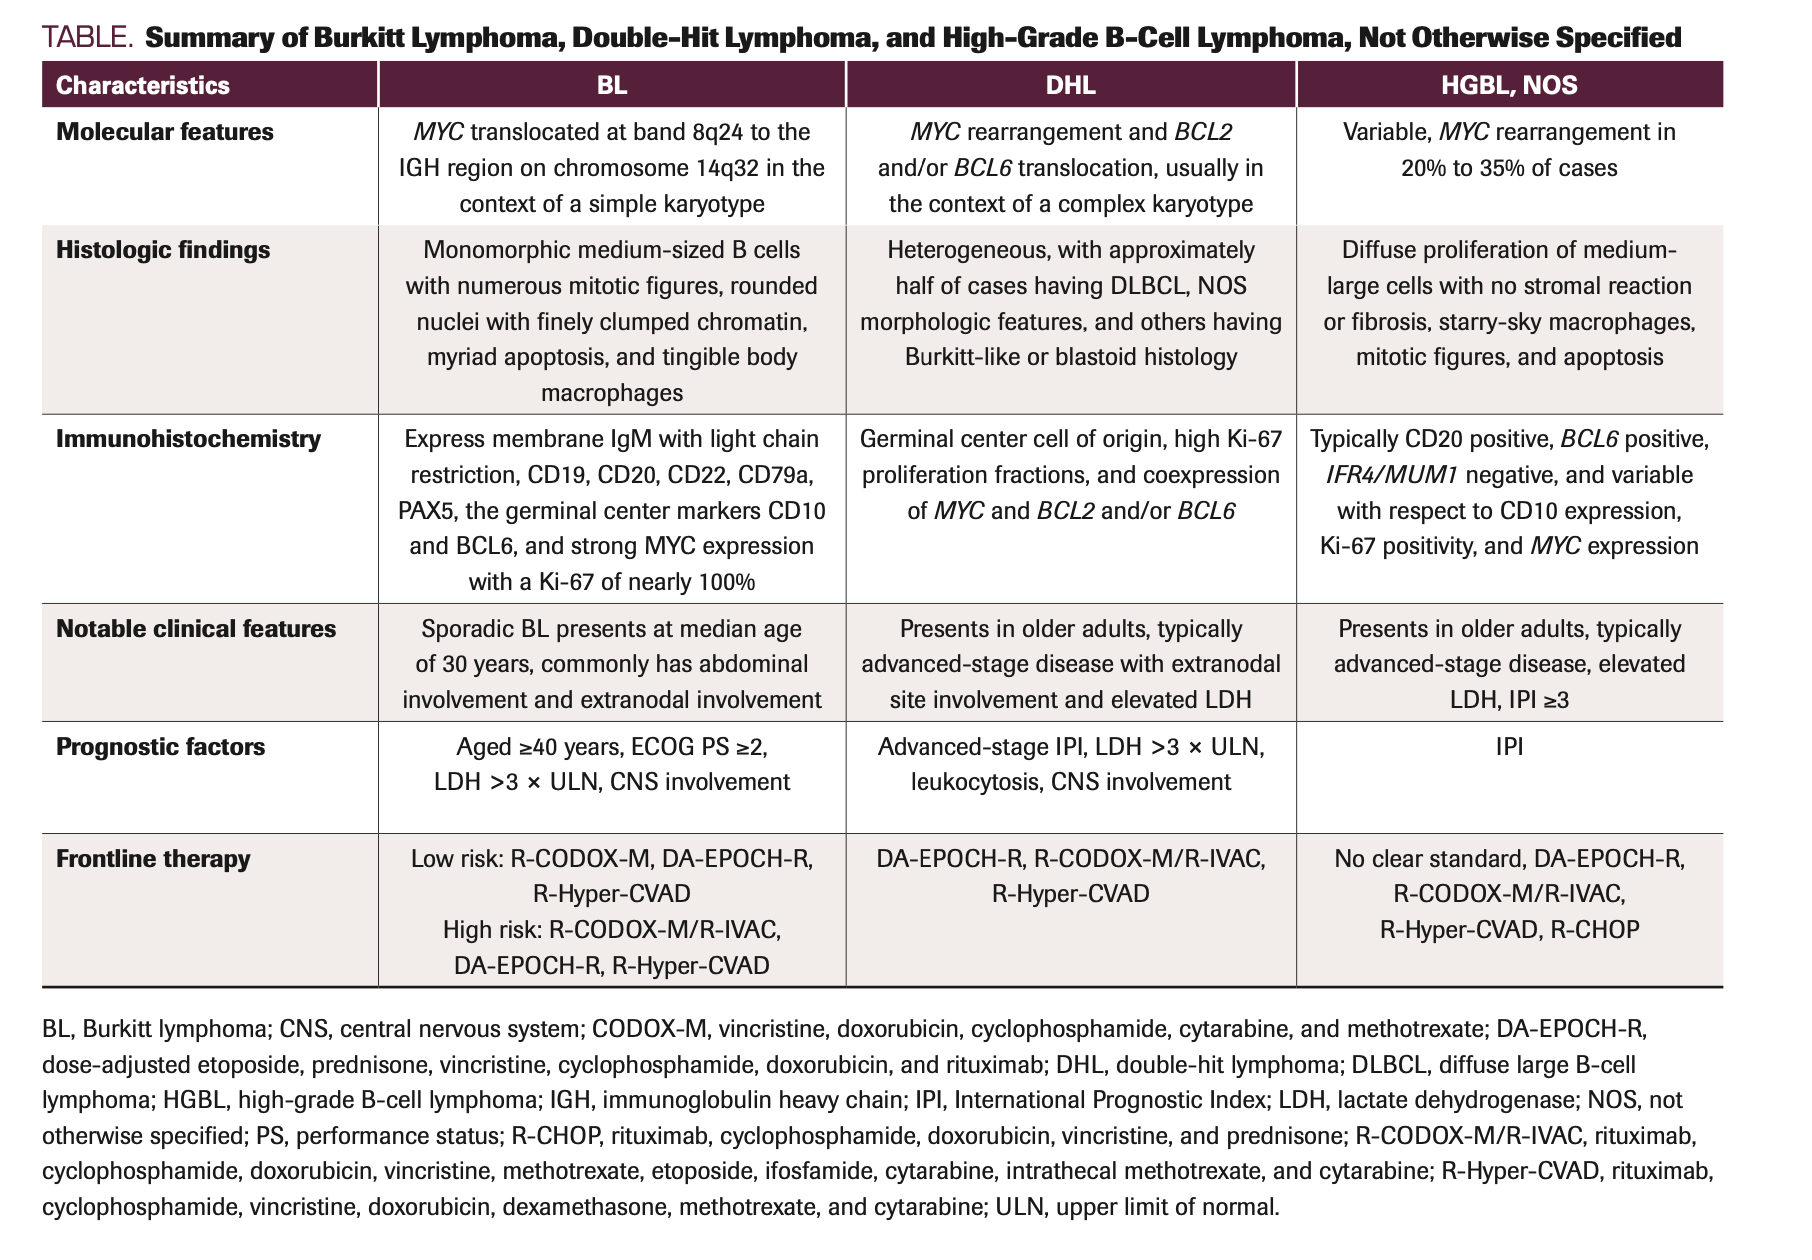 TABLE. Summary of Burkitt Lymphoma, Double-Hit Lymphoma, and High-Grade B-Cell Lymphoma, Not Otherwise Specified